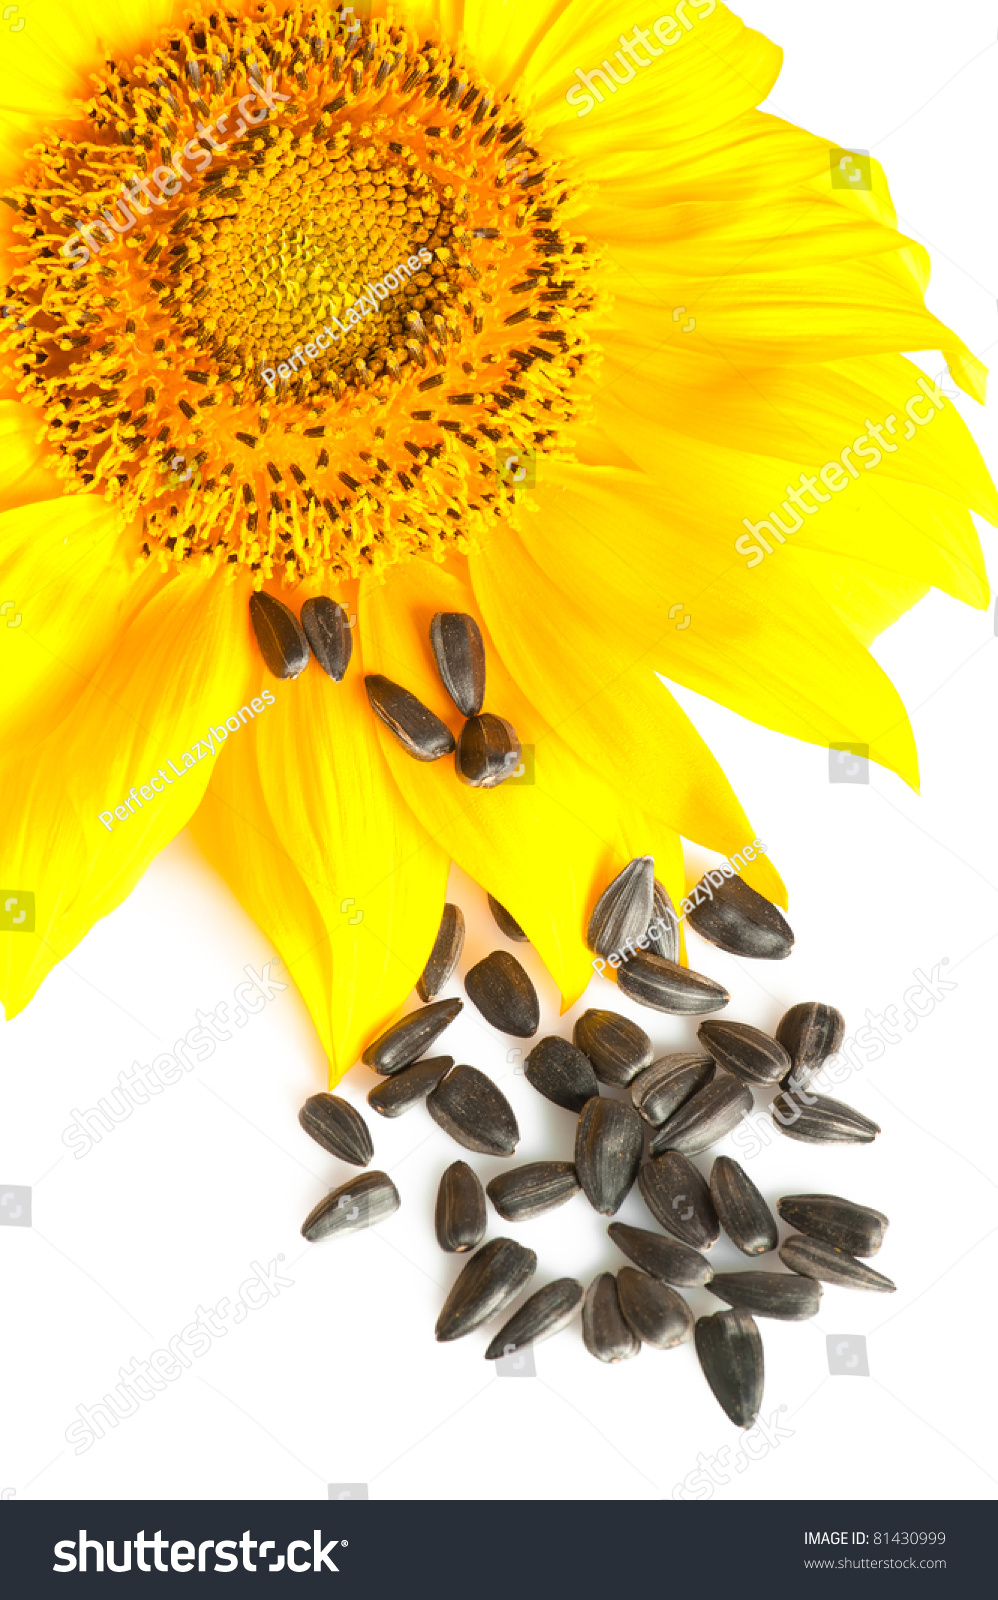 Sunflower And Oily Seeds On White Stock Photo 81430999 : Shutterstock